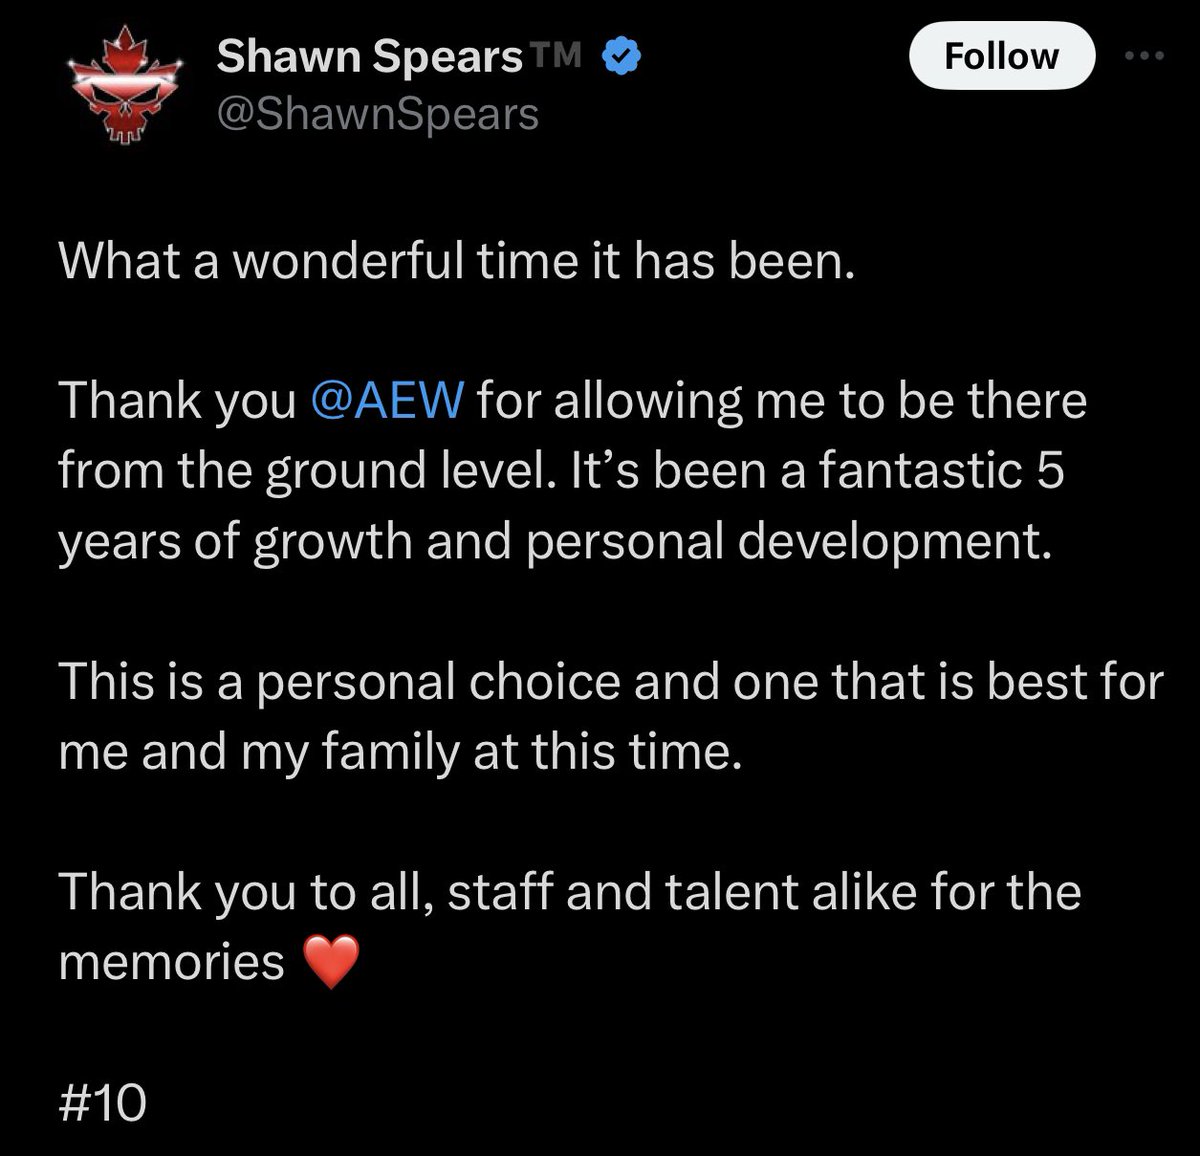 BREAKING NEWS🚨 Shawn Spears will become a Free Agent in 2024! 

Where do you wanna see him wrestle? 

#shawnspears #aewnews #aew #wrestlingnews #prowrestling #werwrestling